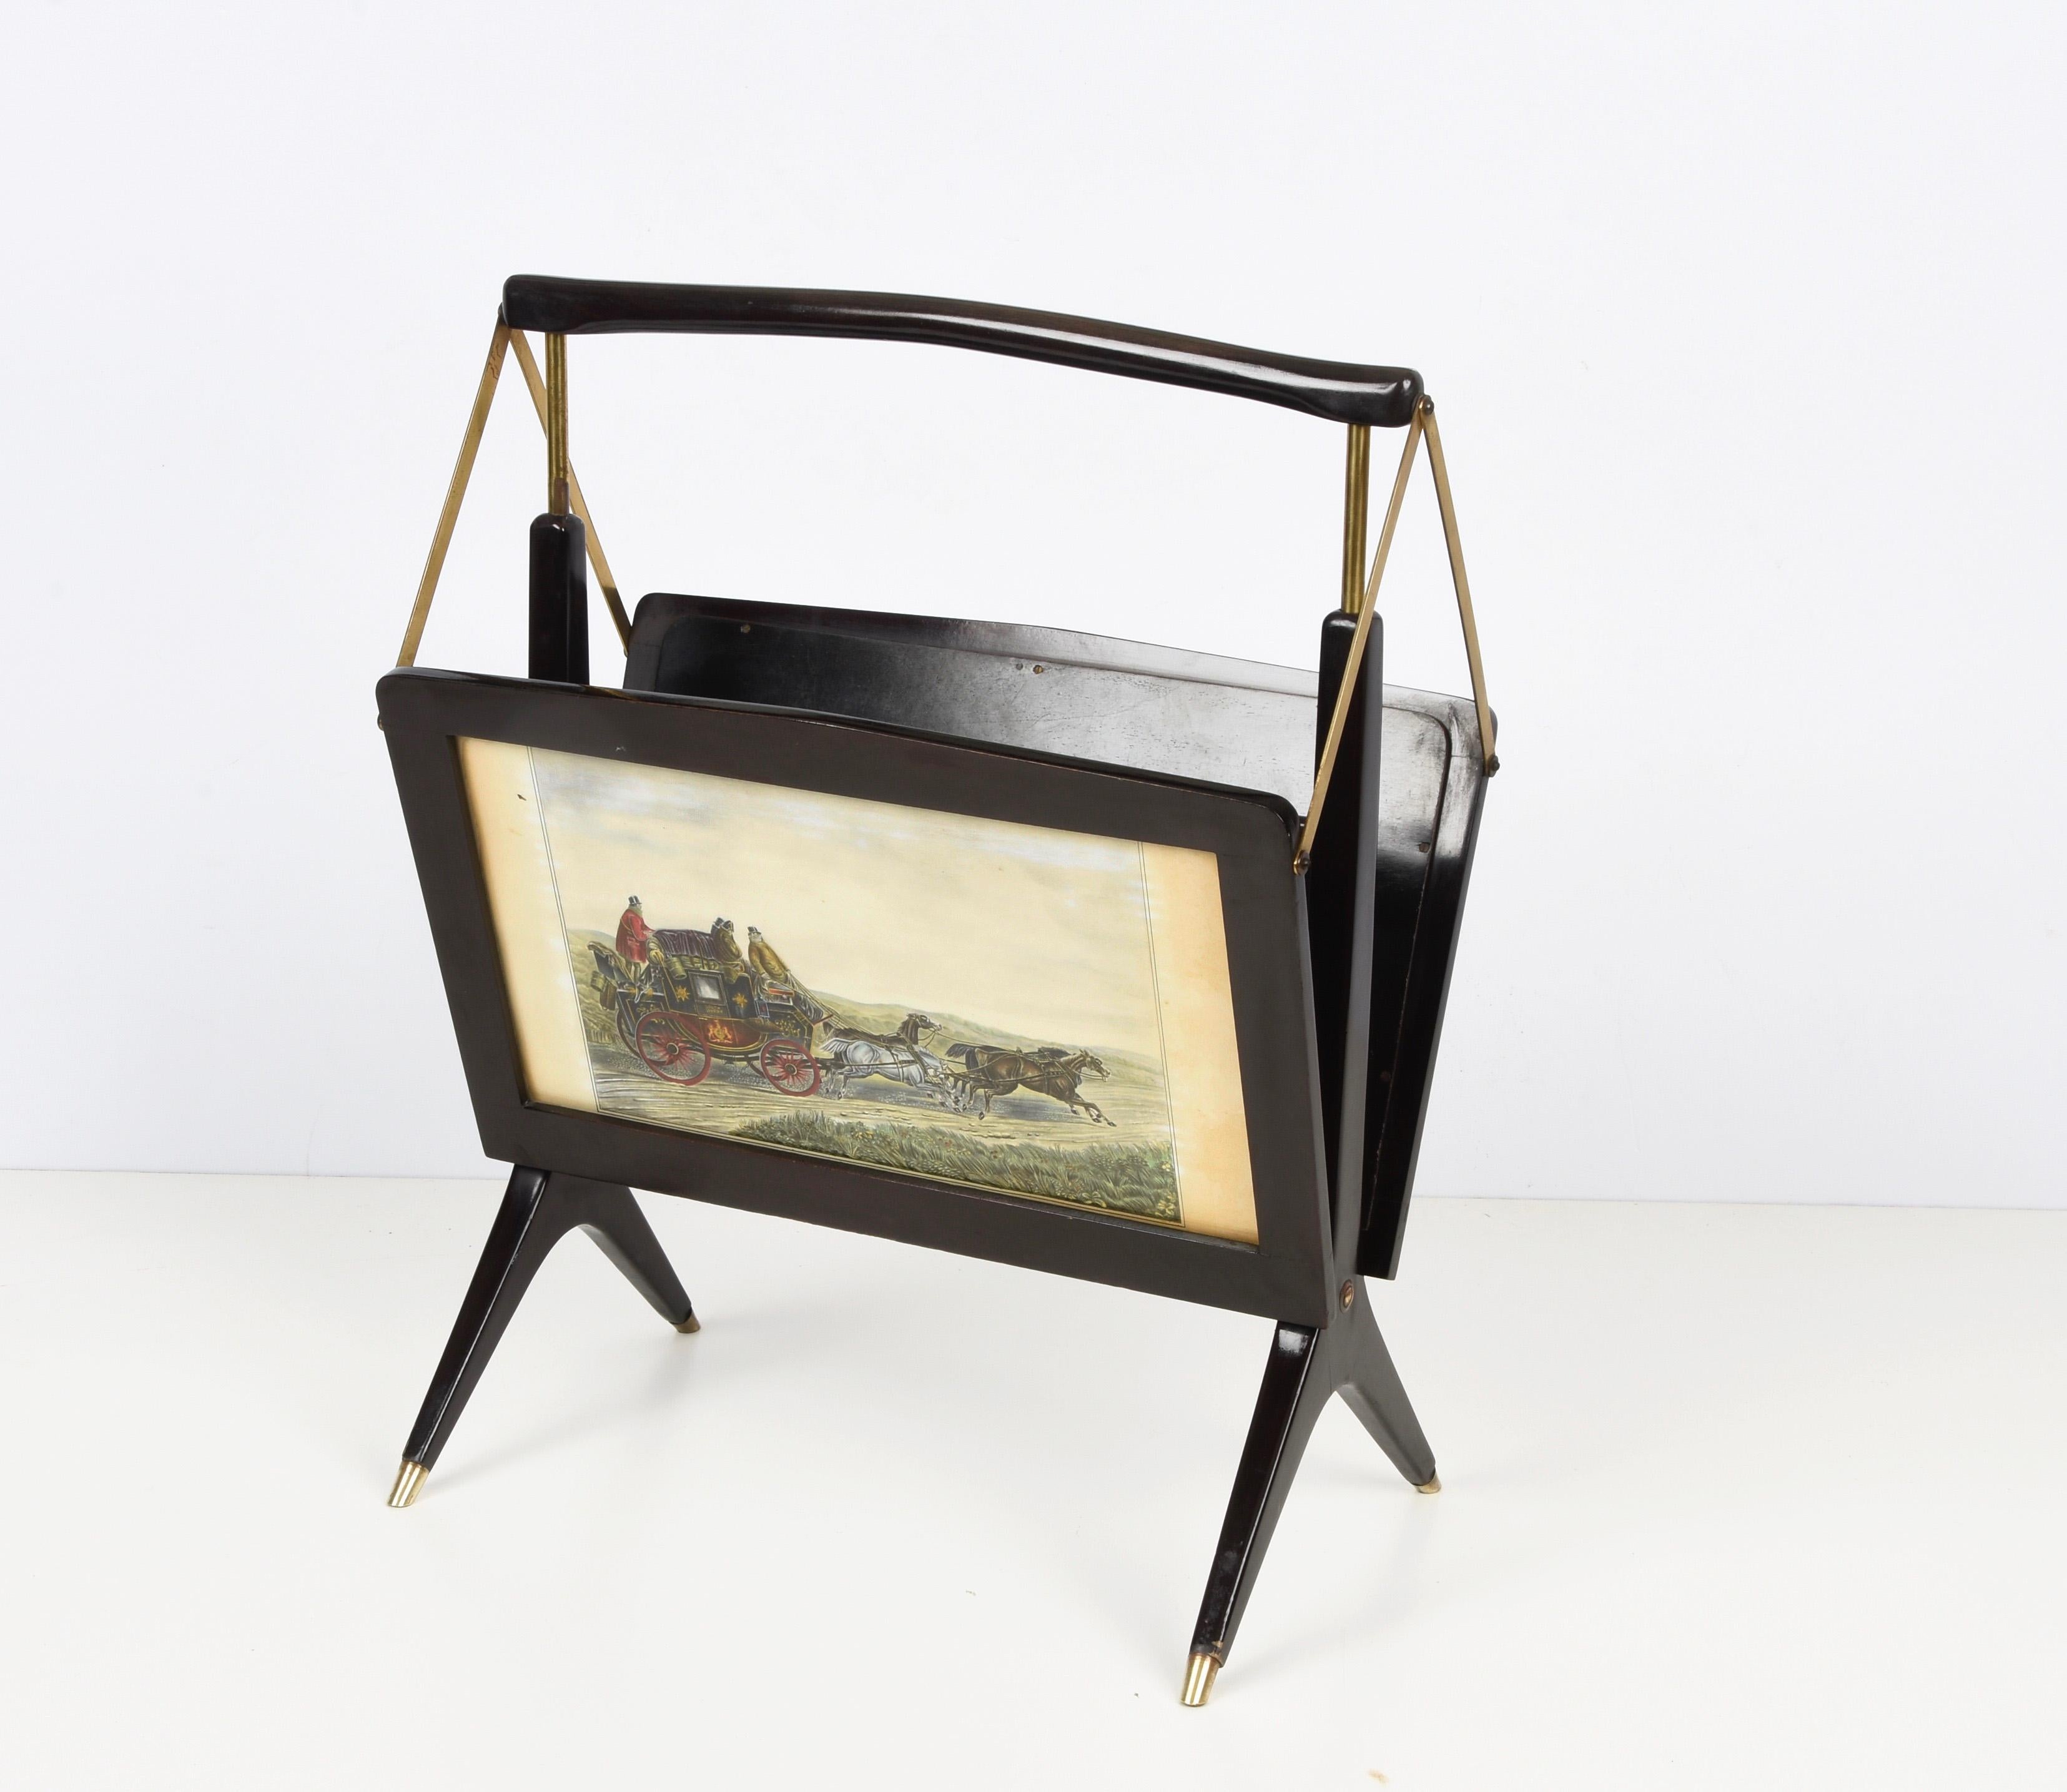 Midcentury Cesare Lacca Wood and Brass Italian Foldable Magazine Rack, 1950s For Sale 5